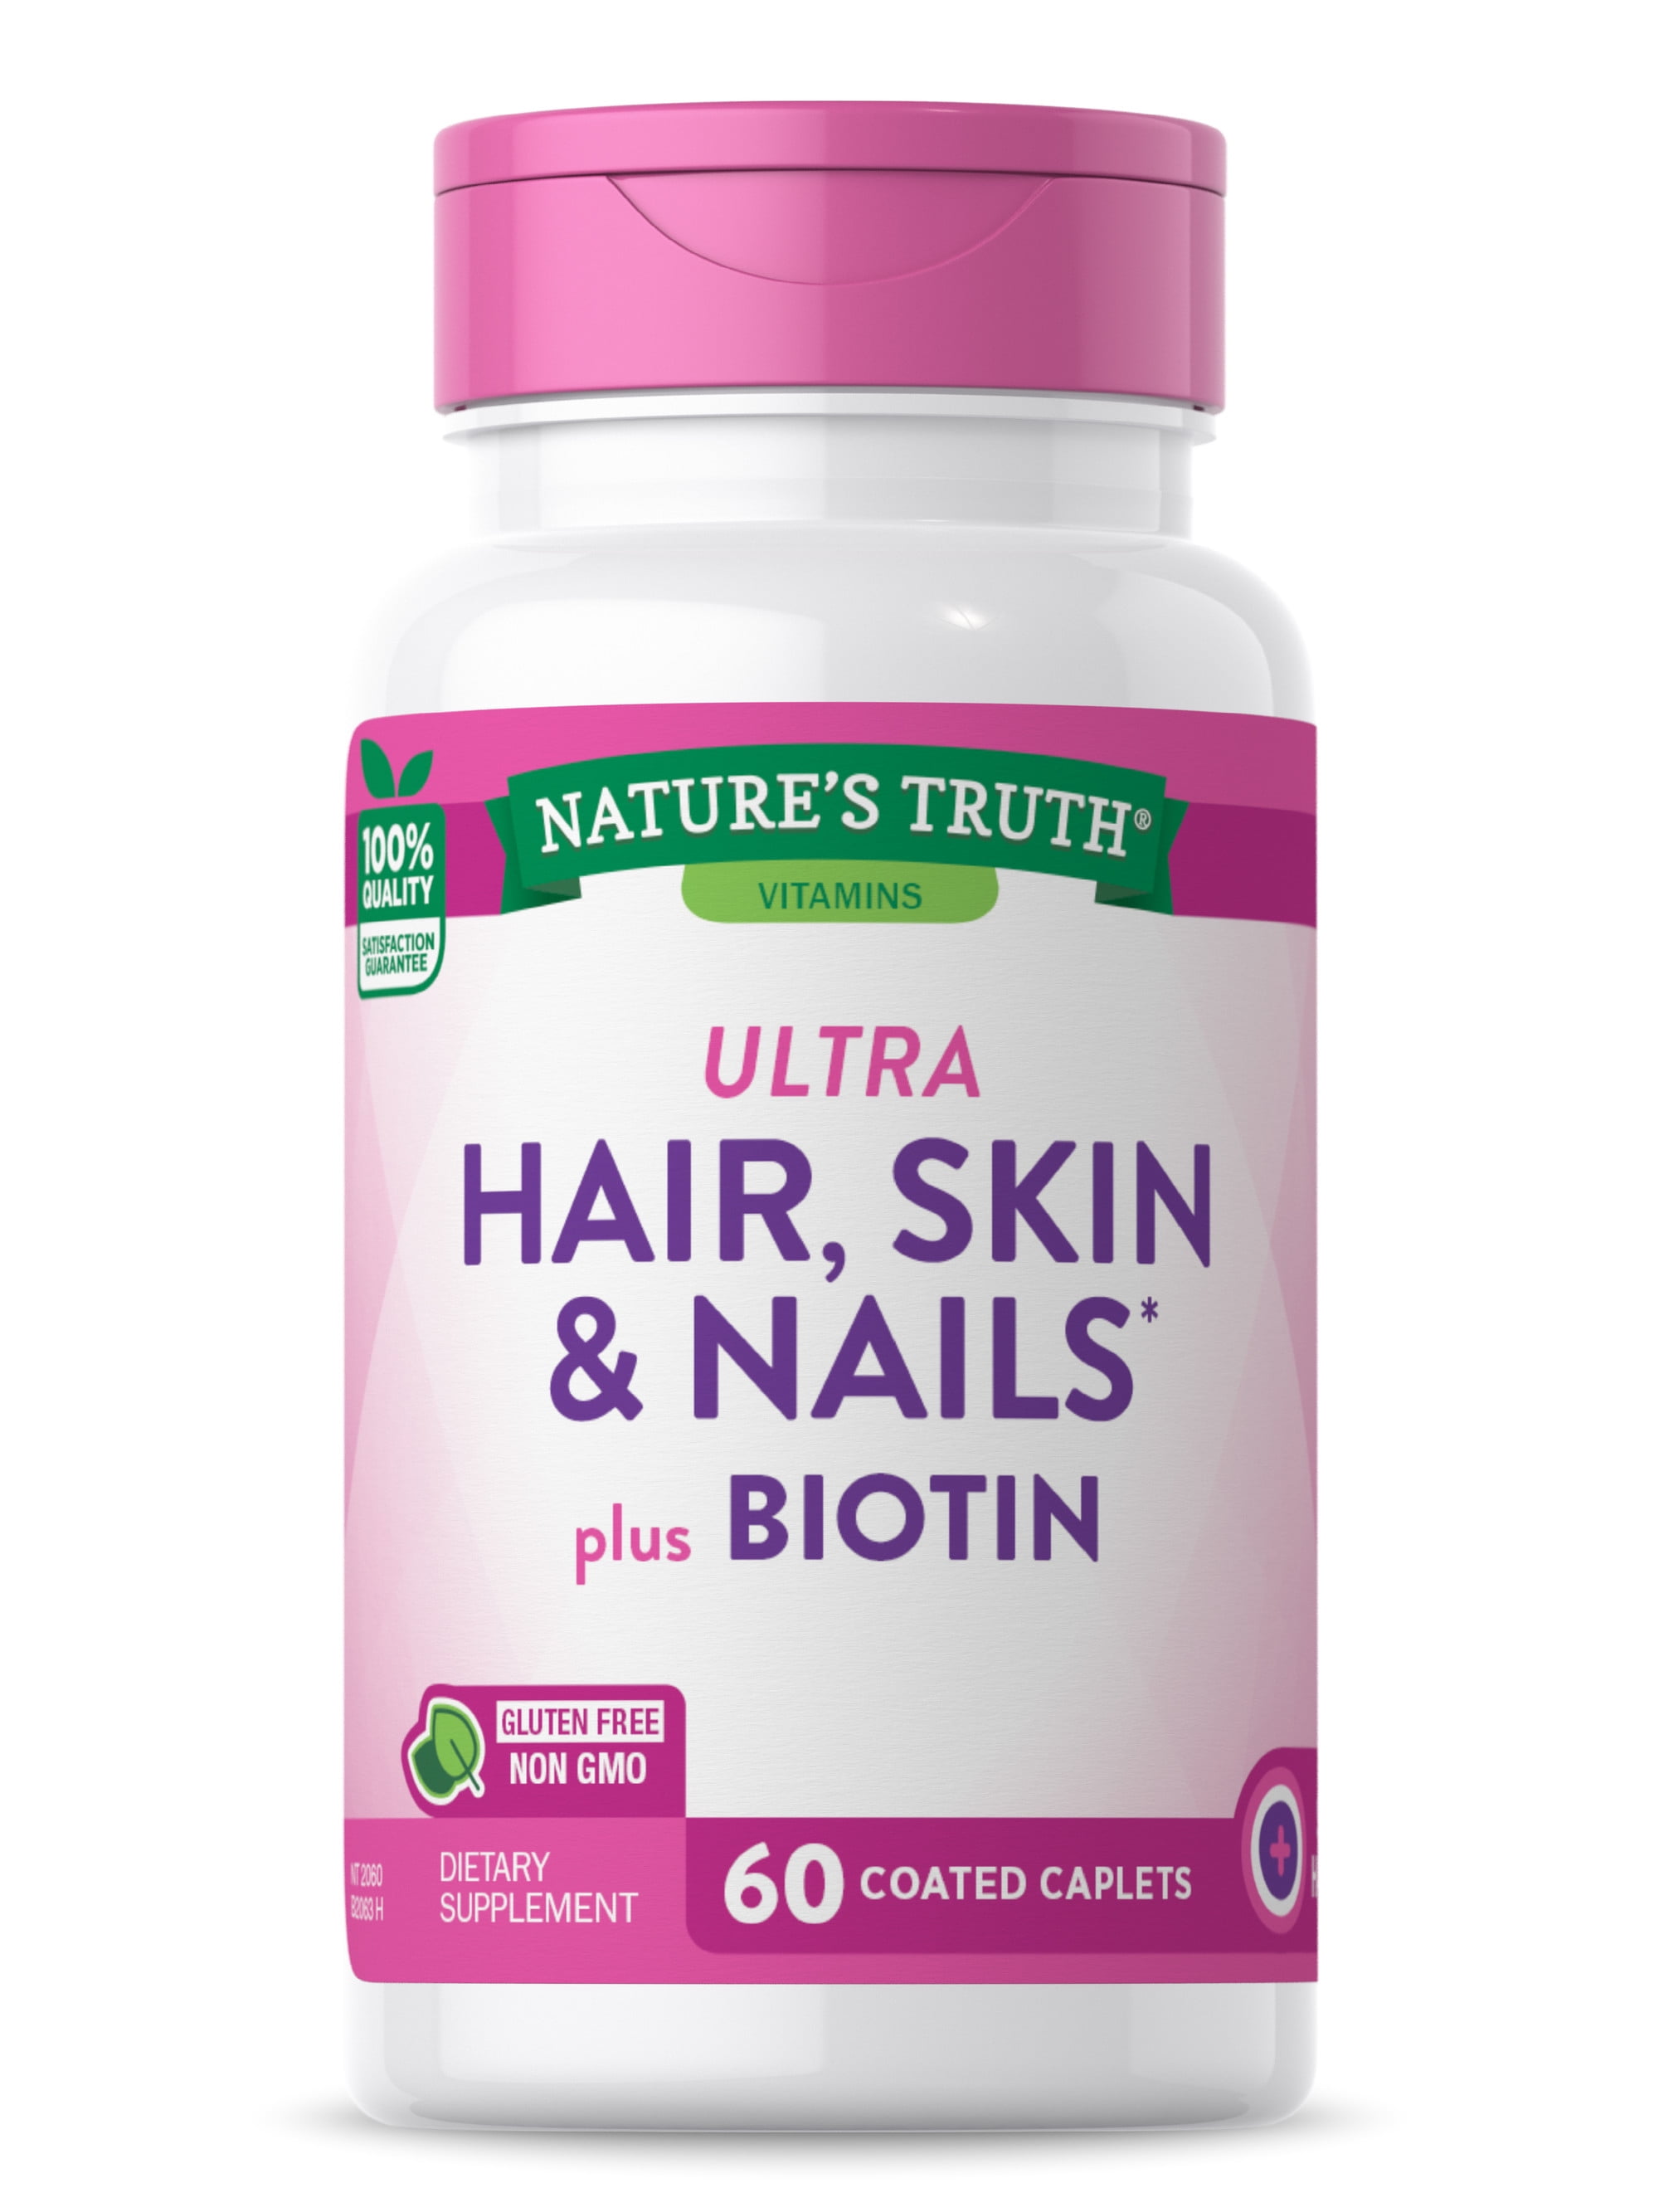 Utra Hair Skin and Nails Vitamins | 60 Caplets | With Biotin and Collagen |  Non-GMO, Gluten Free Supplement | For Women and Men | by Nature's Truth -  